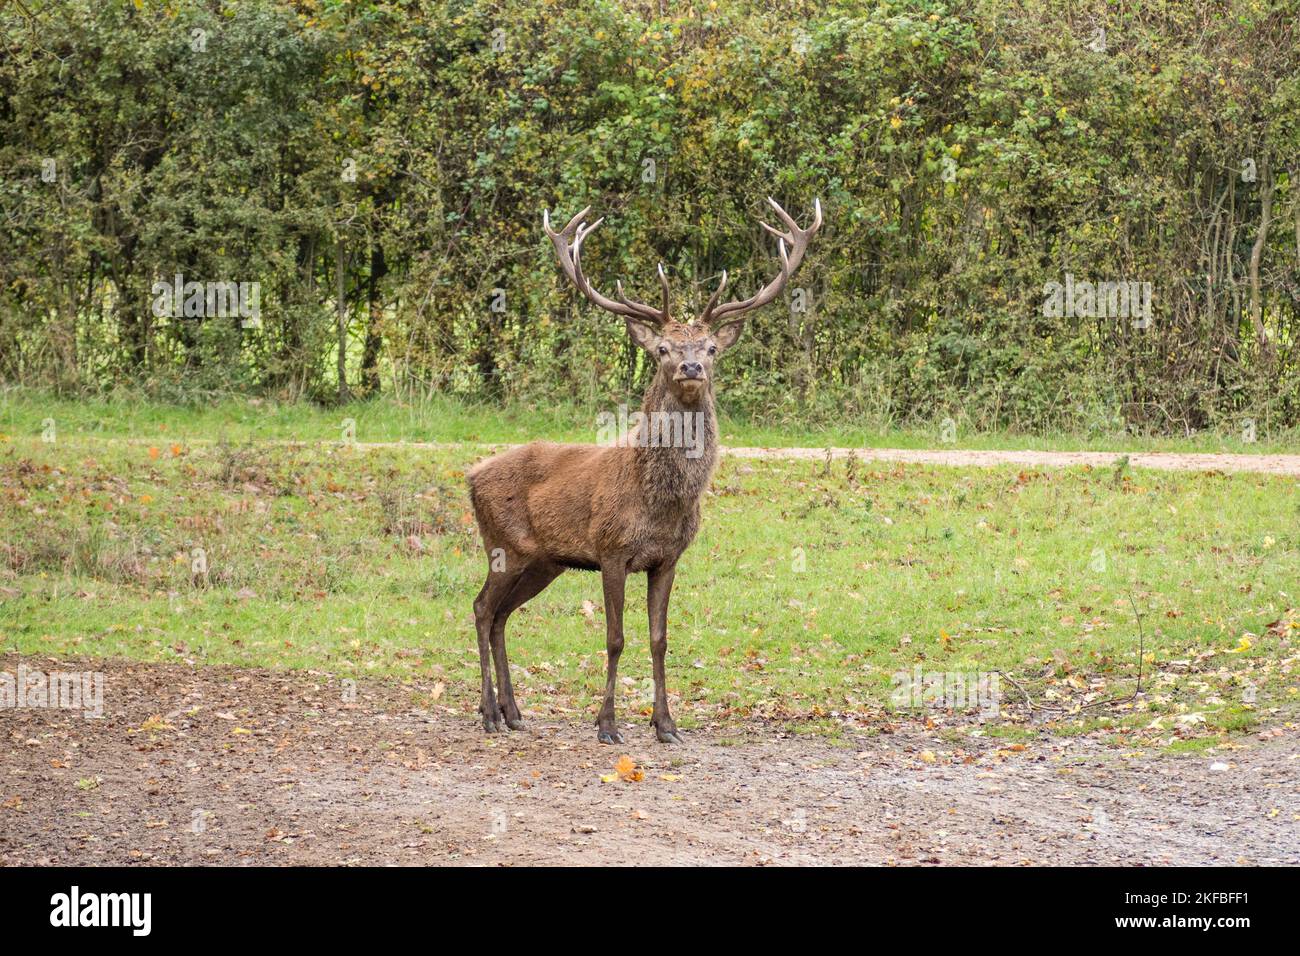 A mature male stag red deer staring at the camera in Windsor Great Park, UK. Stock Photo